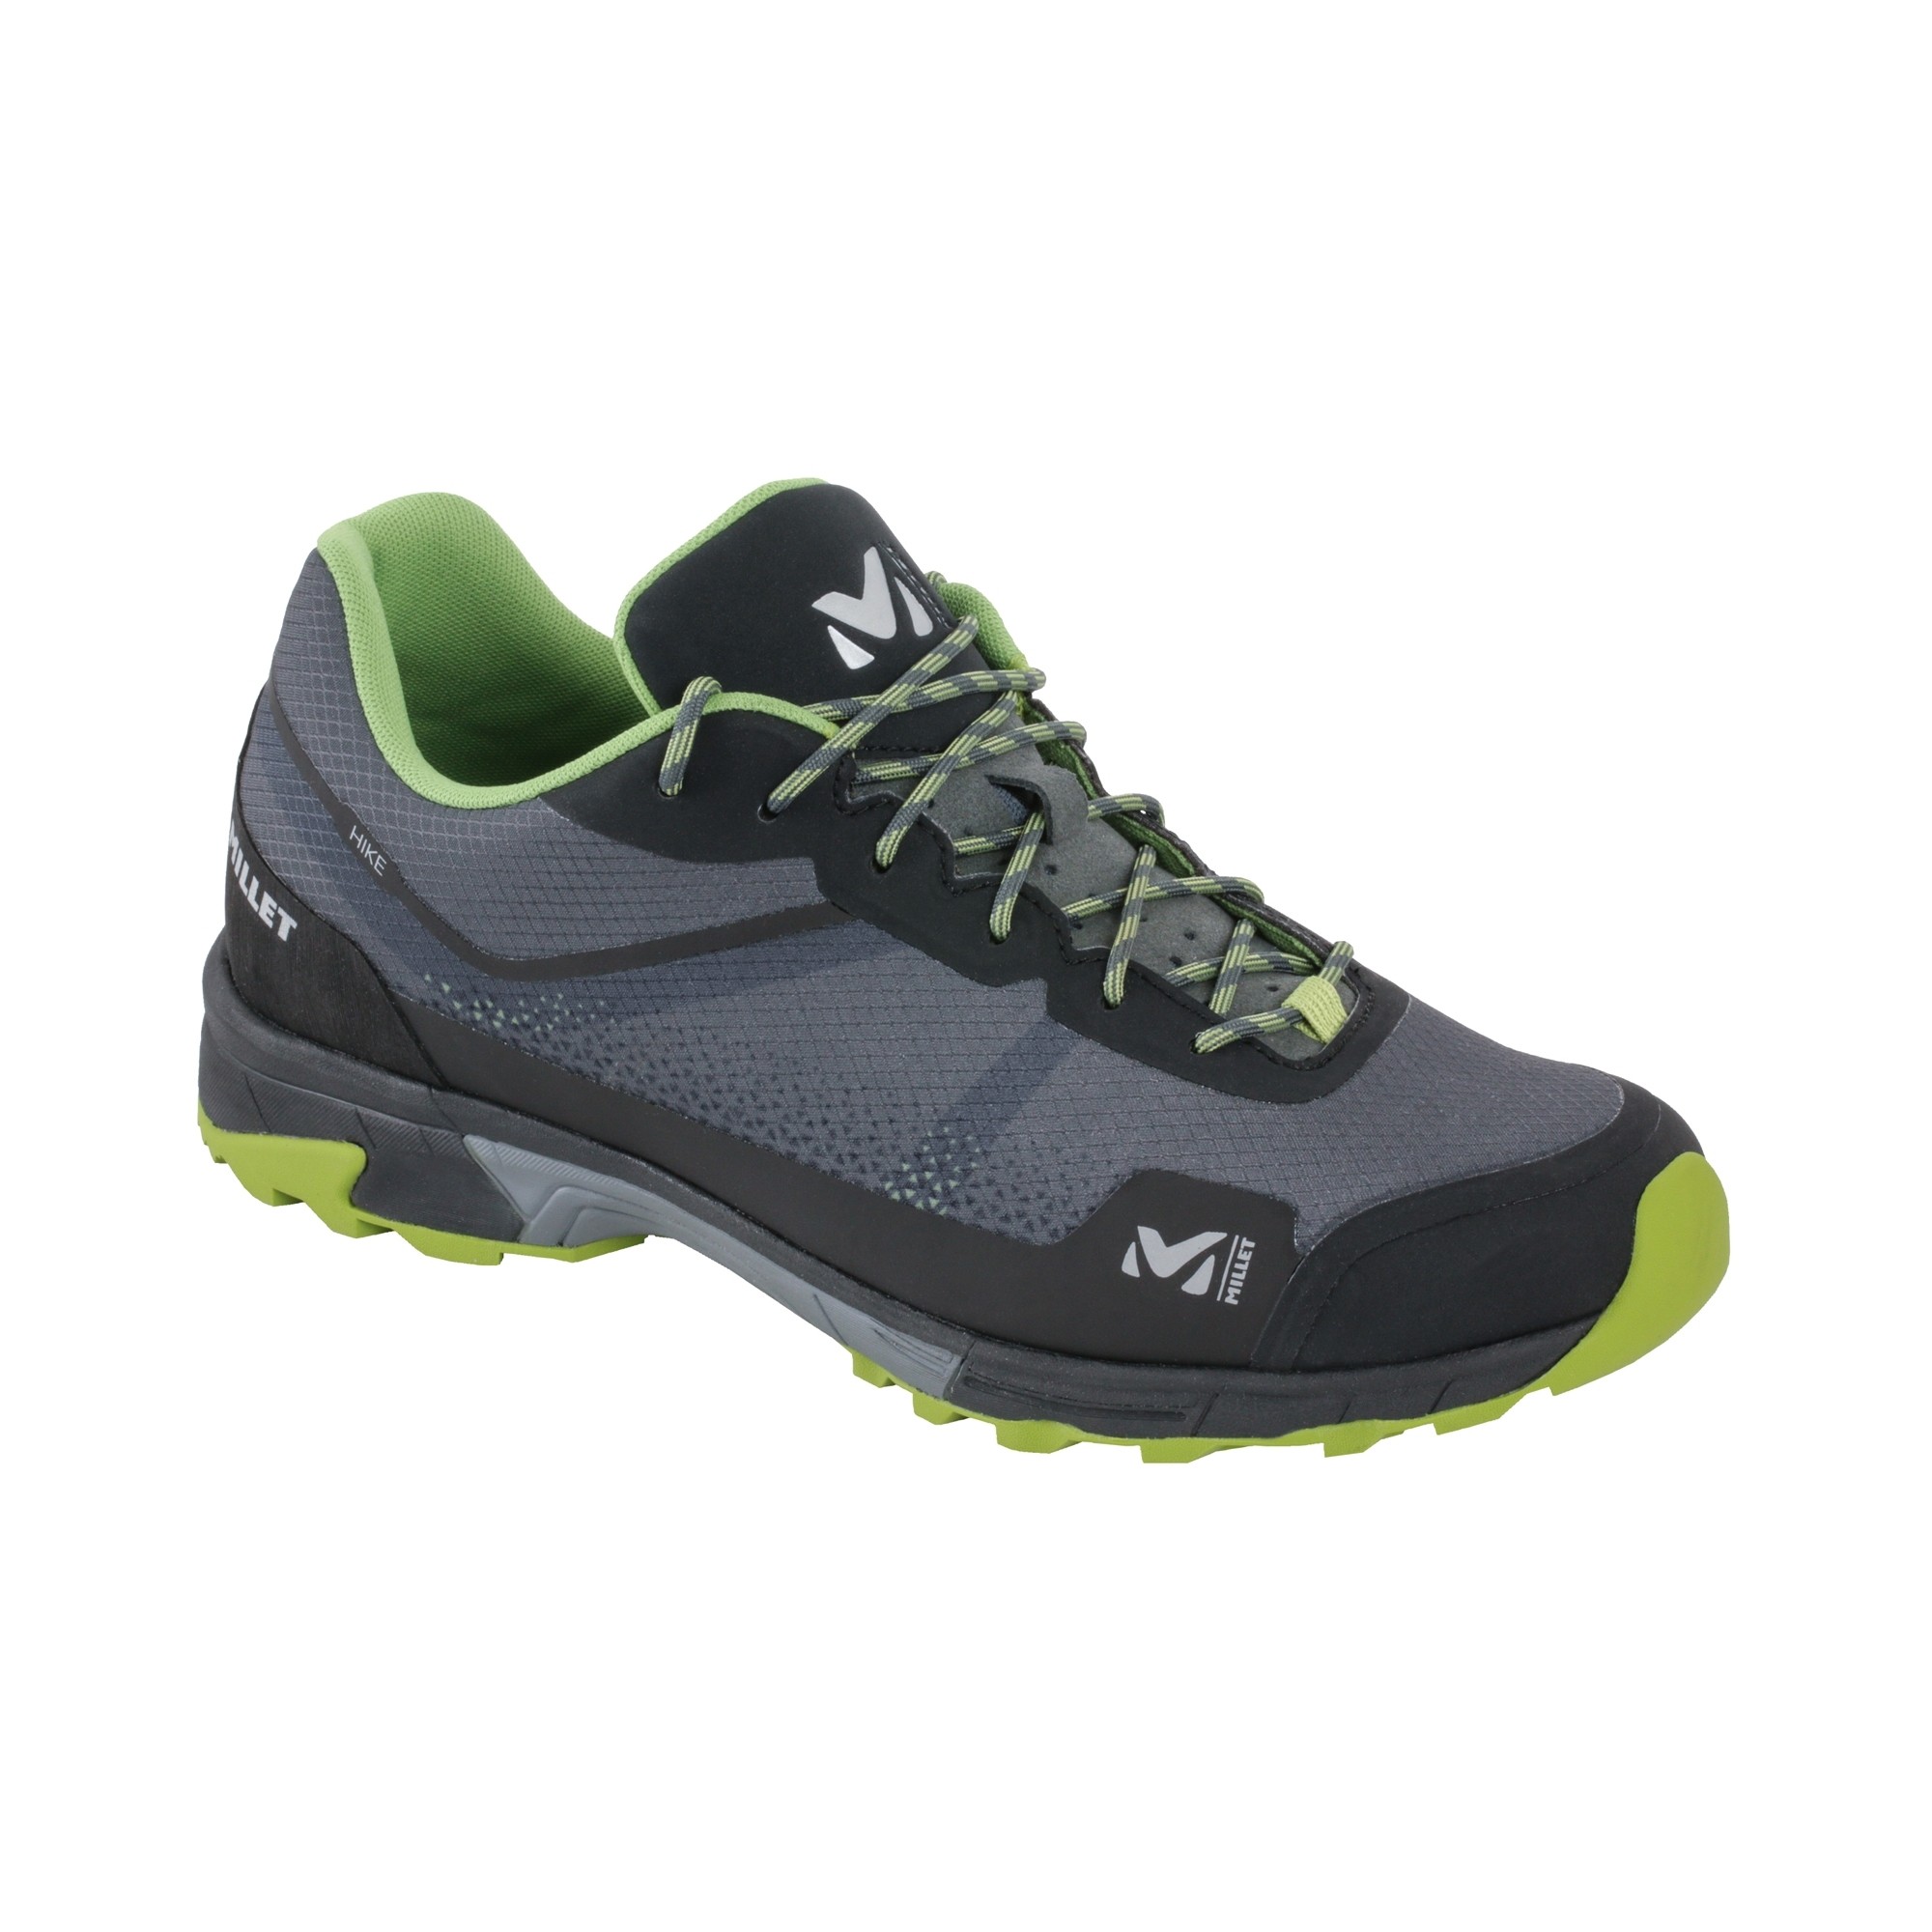 MILLET Unisex Adults Low Rise Hiking Shoes 